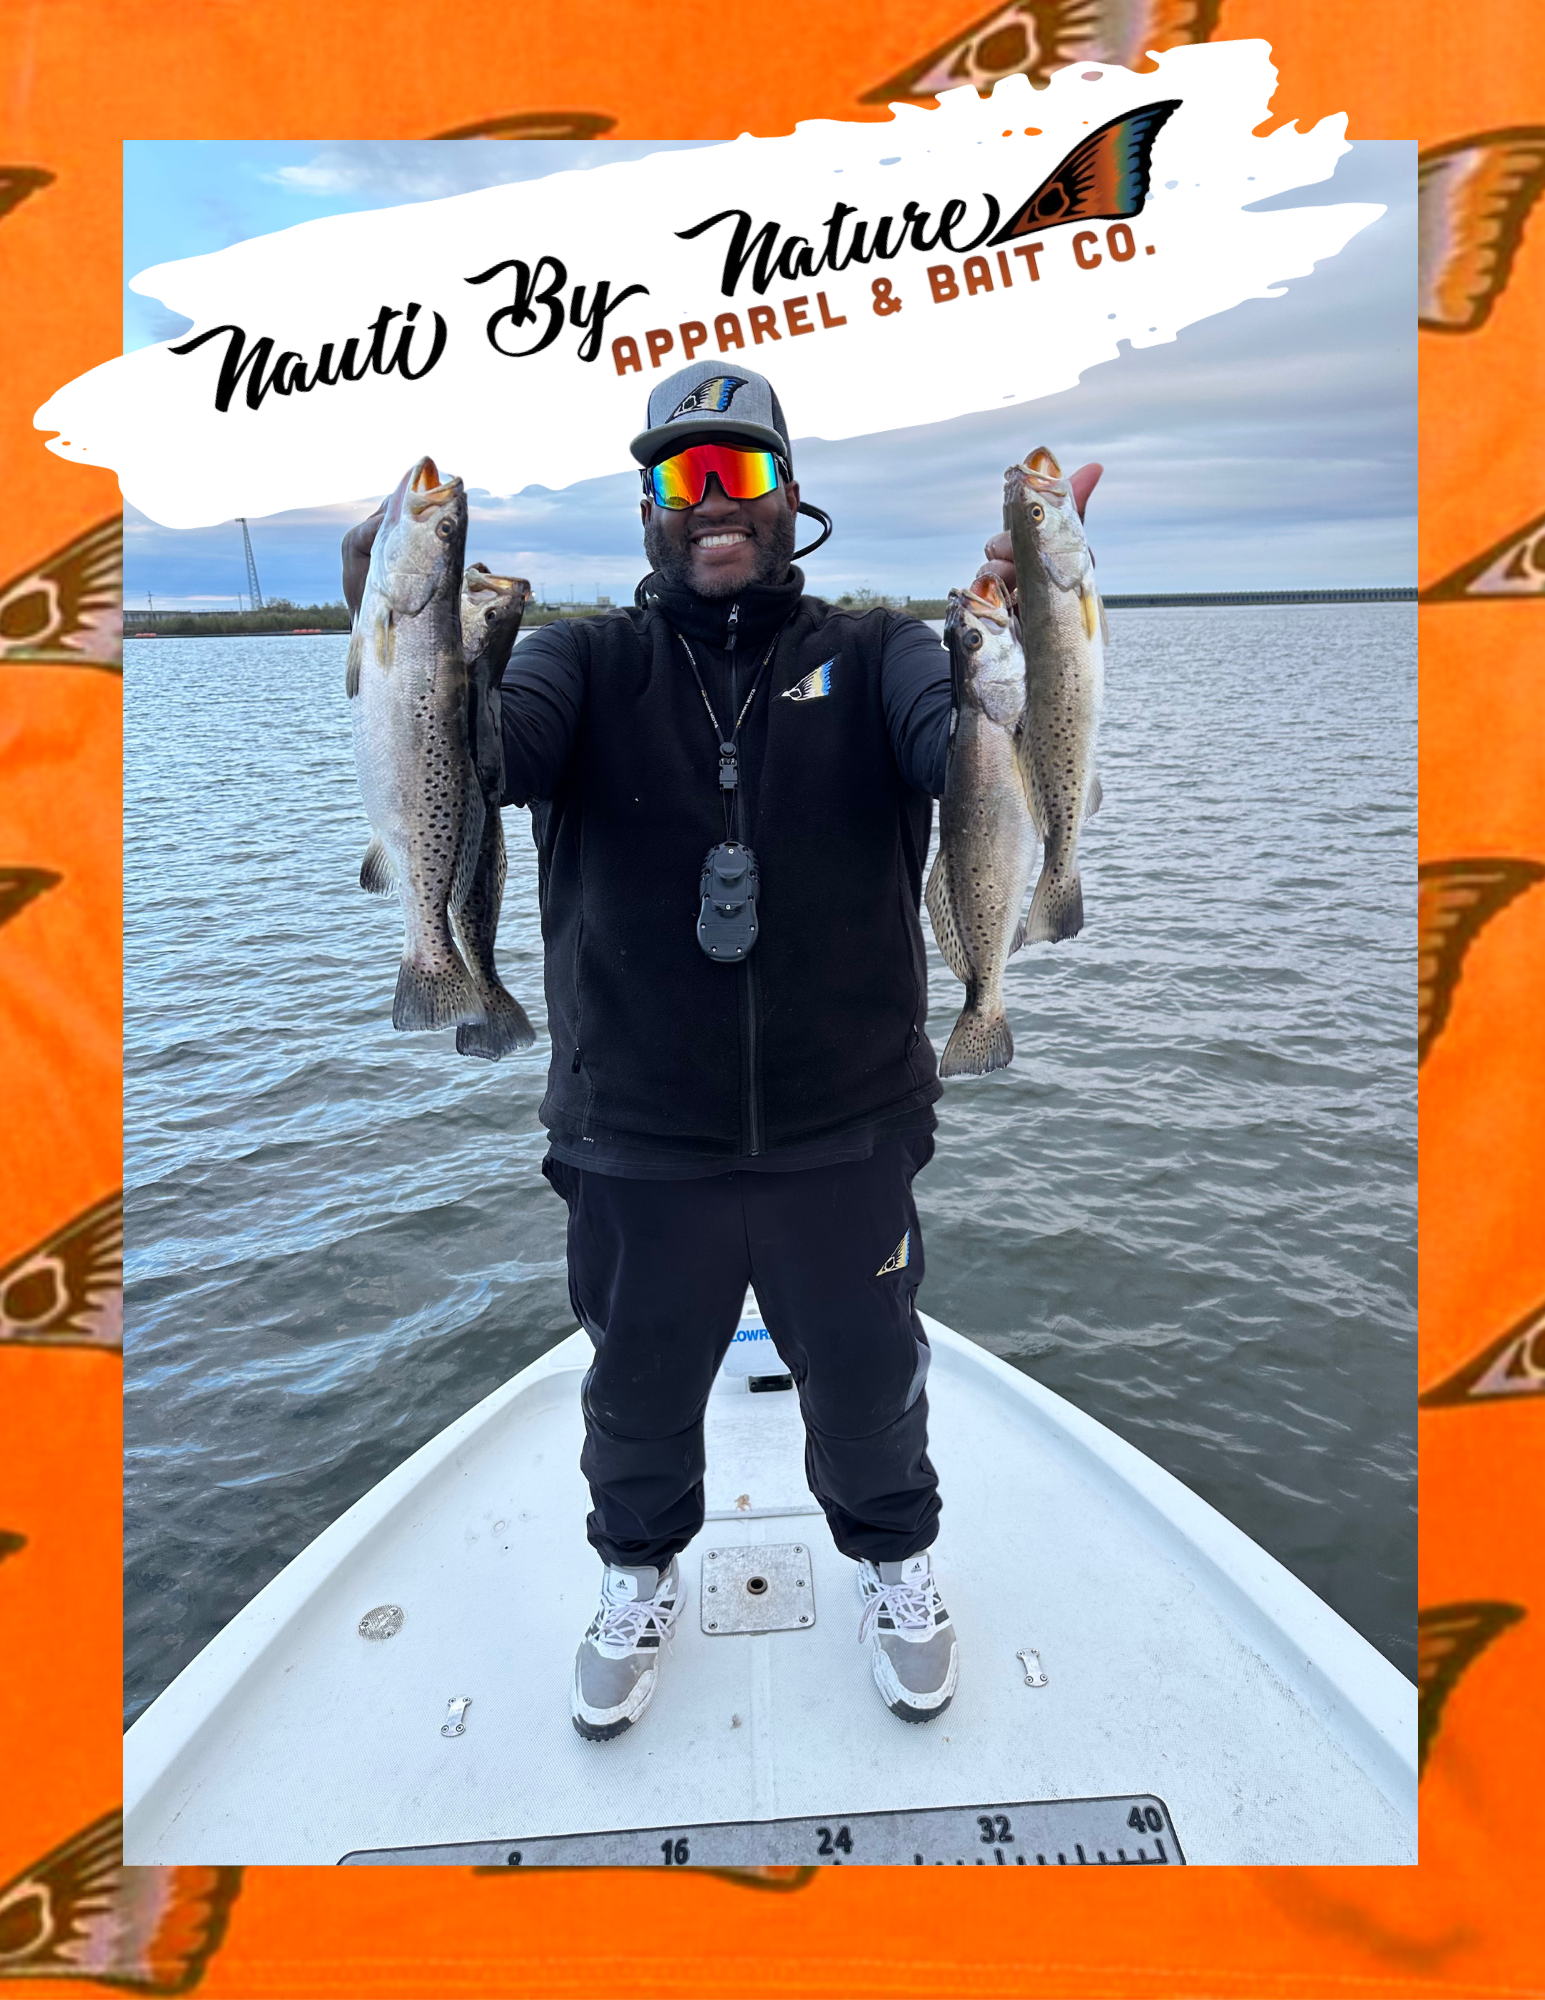 Nauti By Nature Apparel and Bait Company